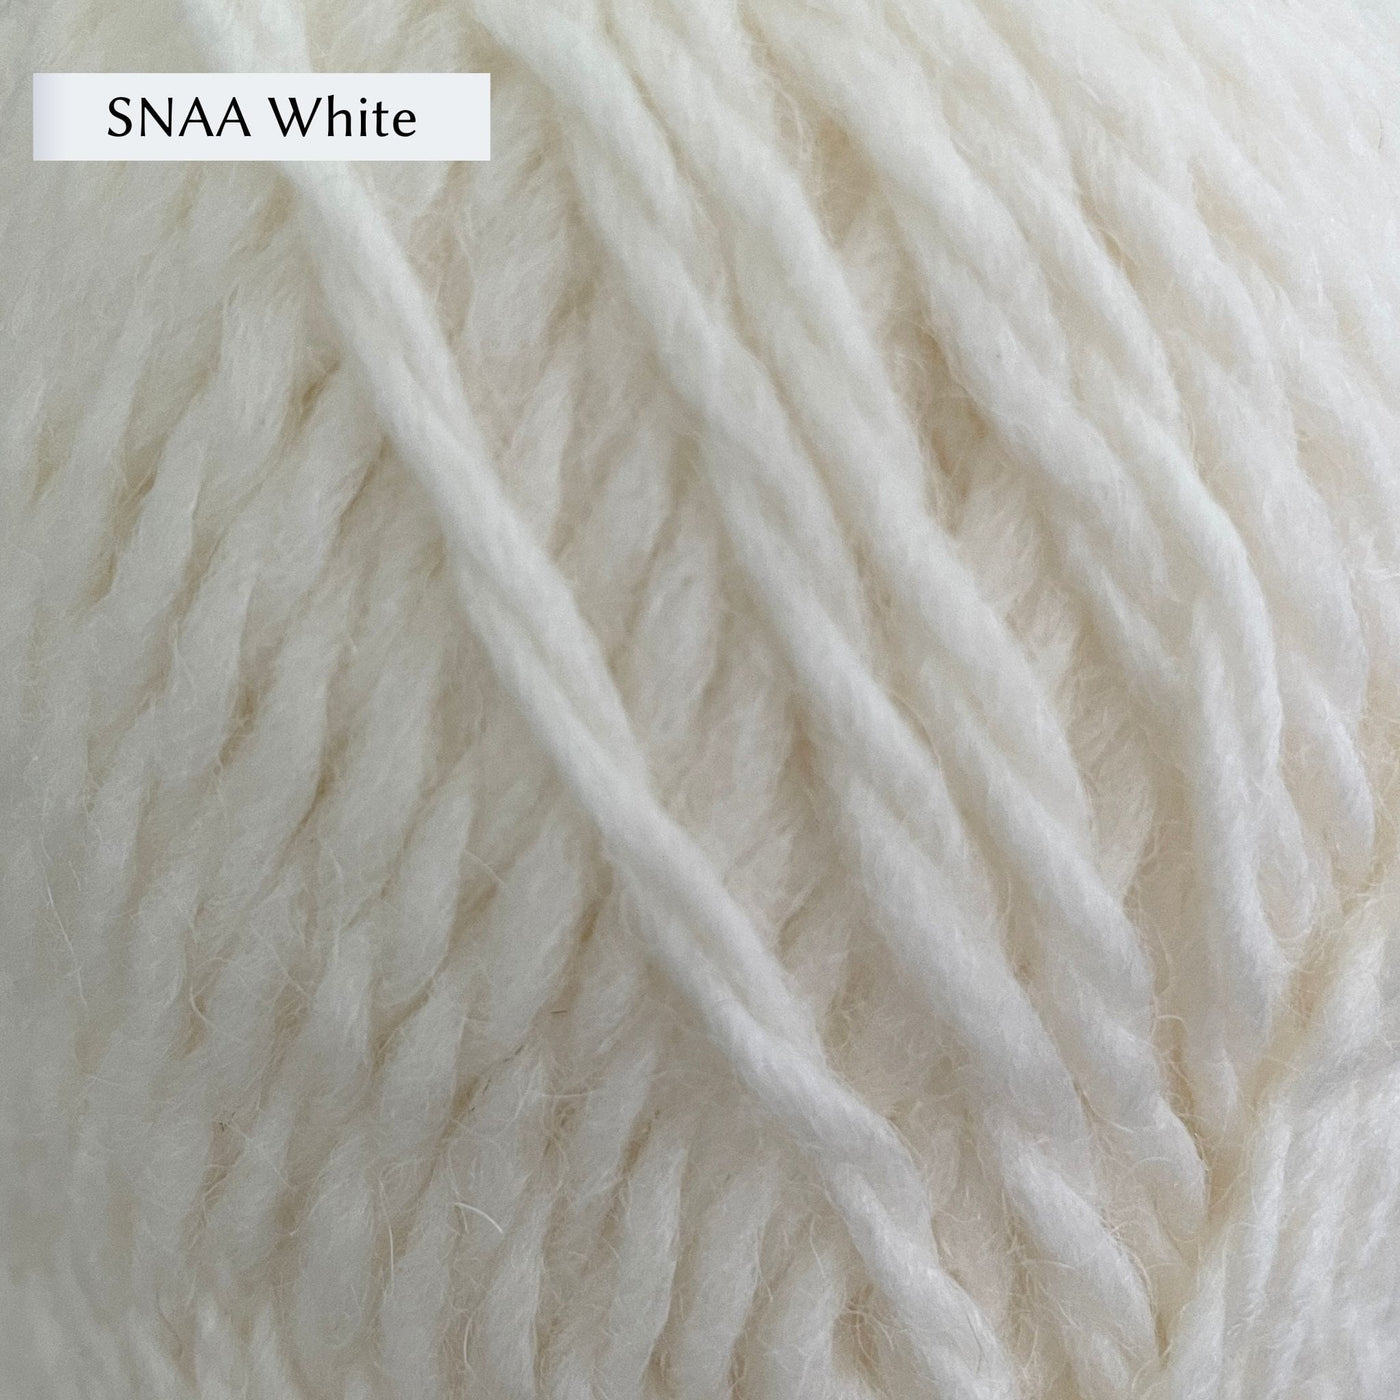 Jamieson & Smith Aran Worsted Yarn close up photo of SNAA White Colorway which is a white color.